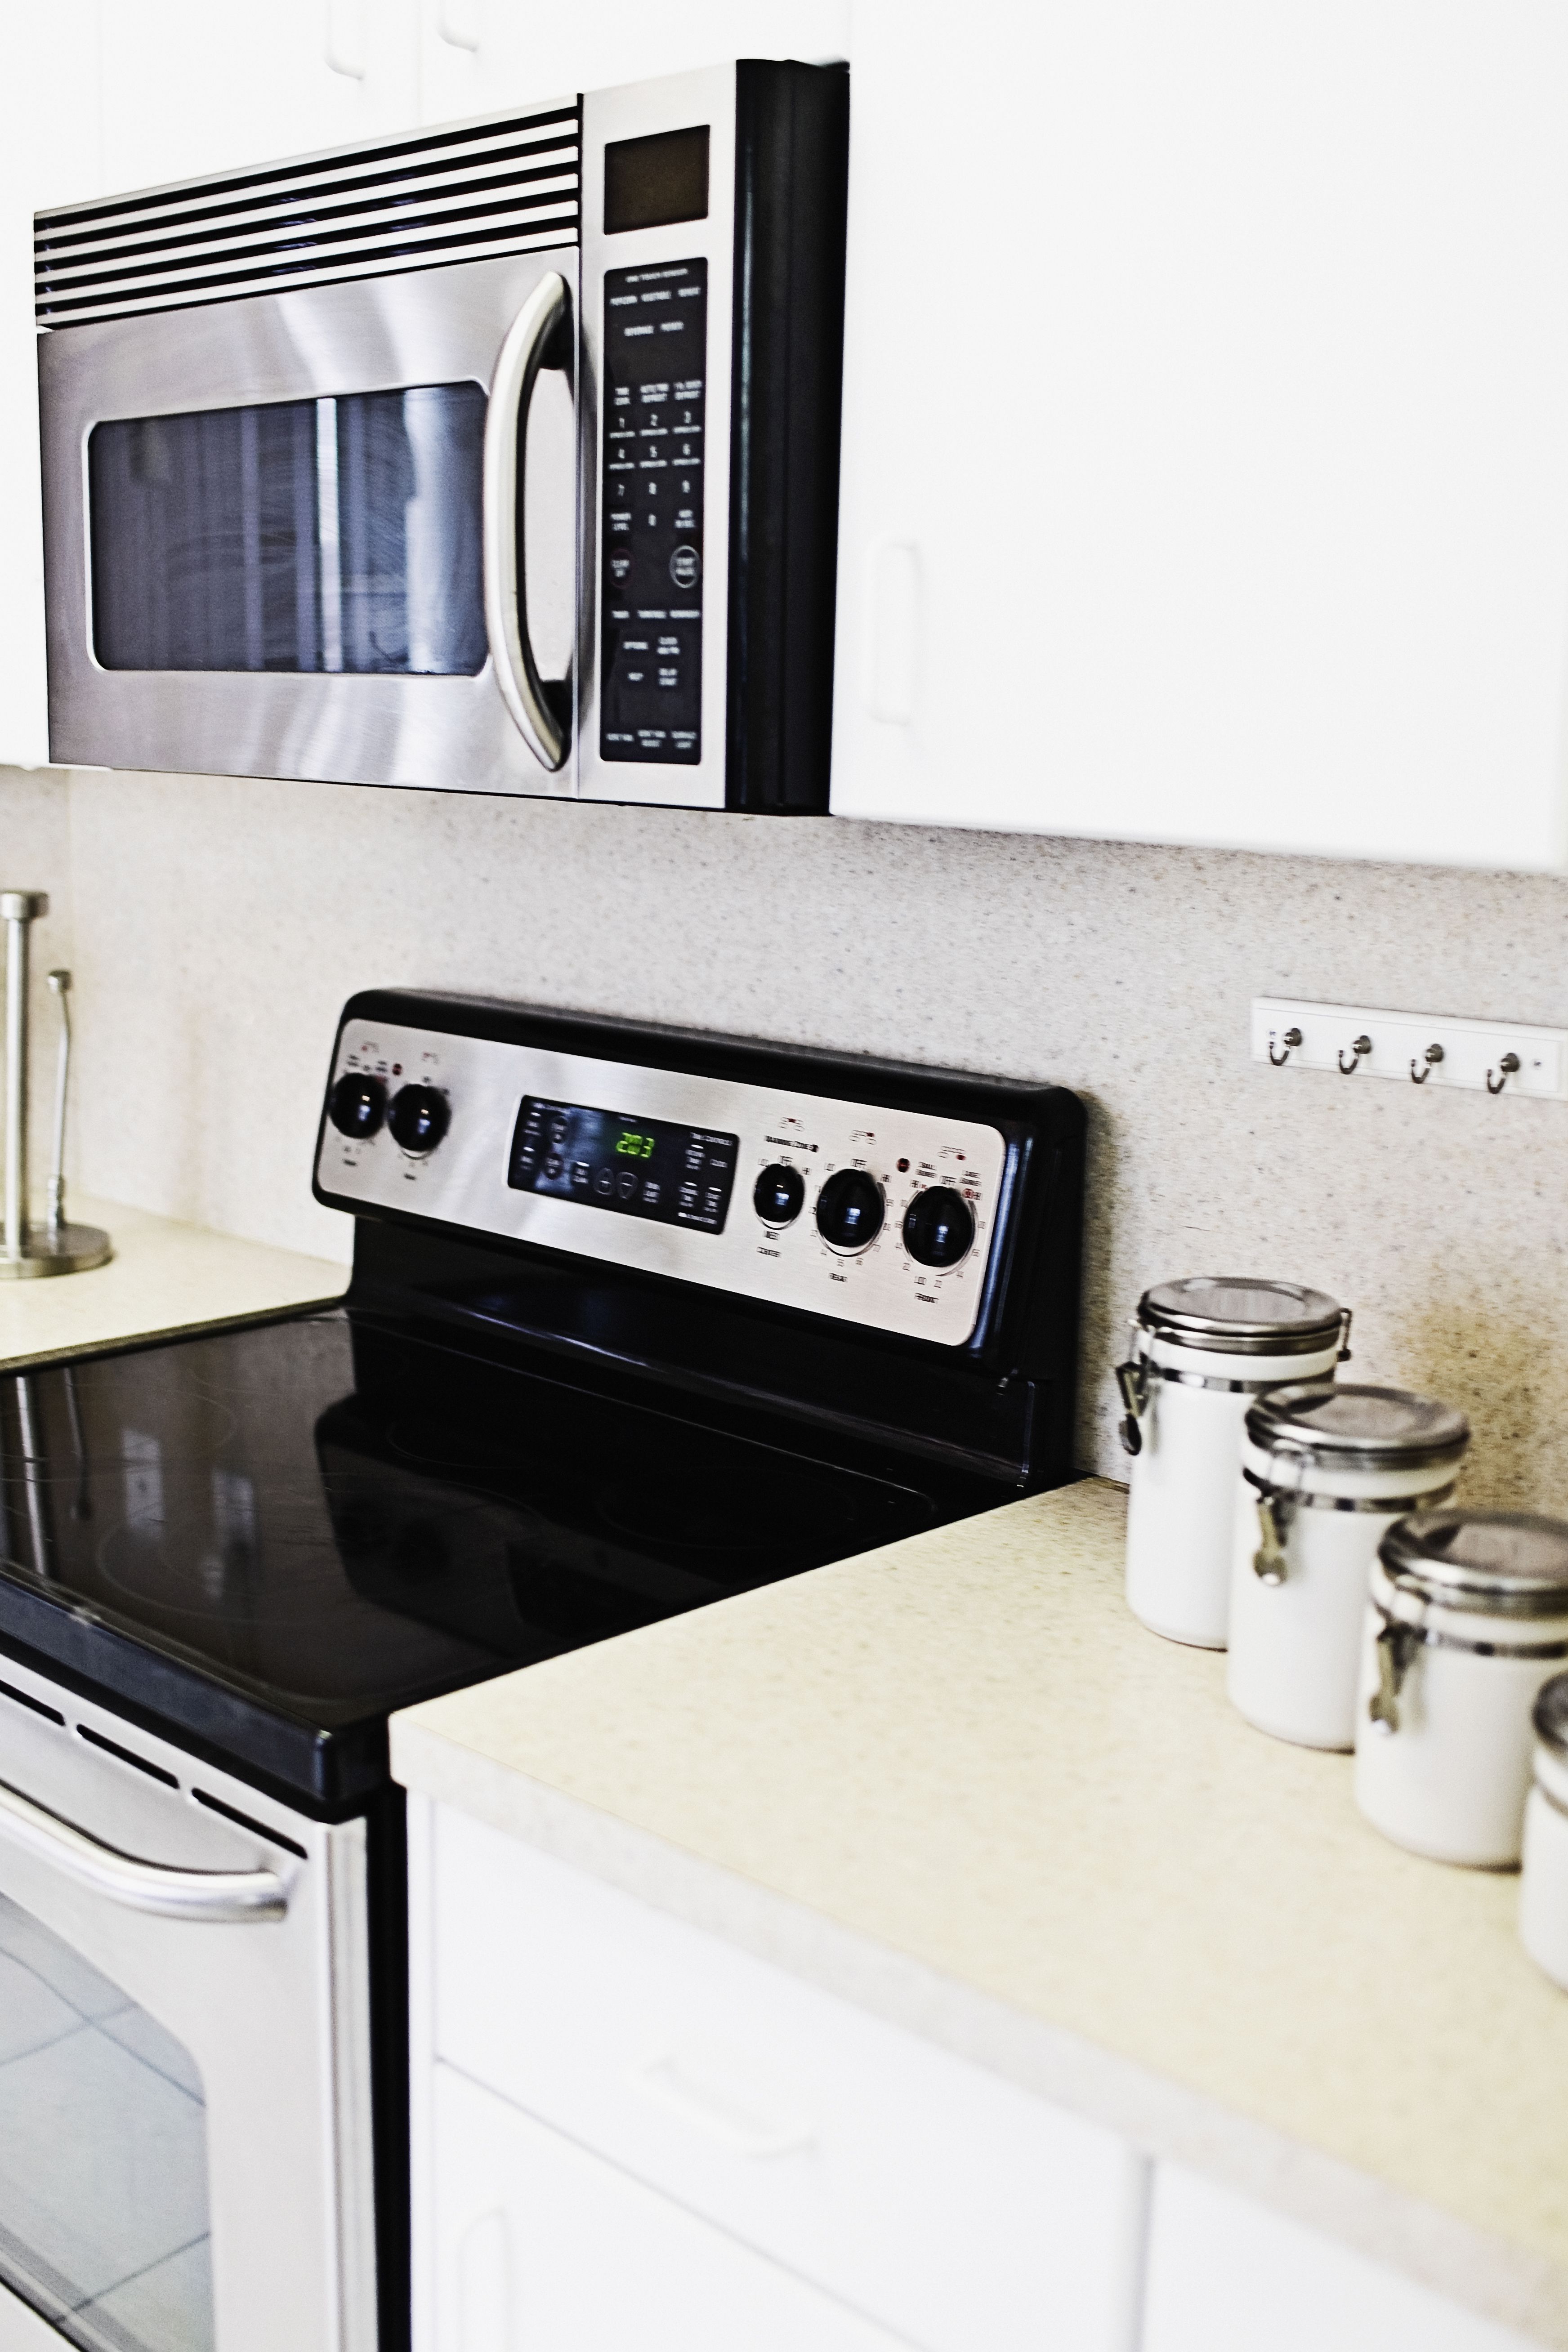 How to Install an OverTheRange Microwave Oven